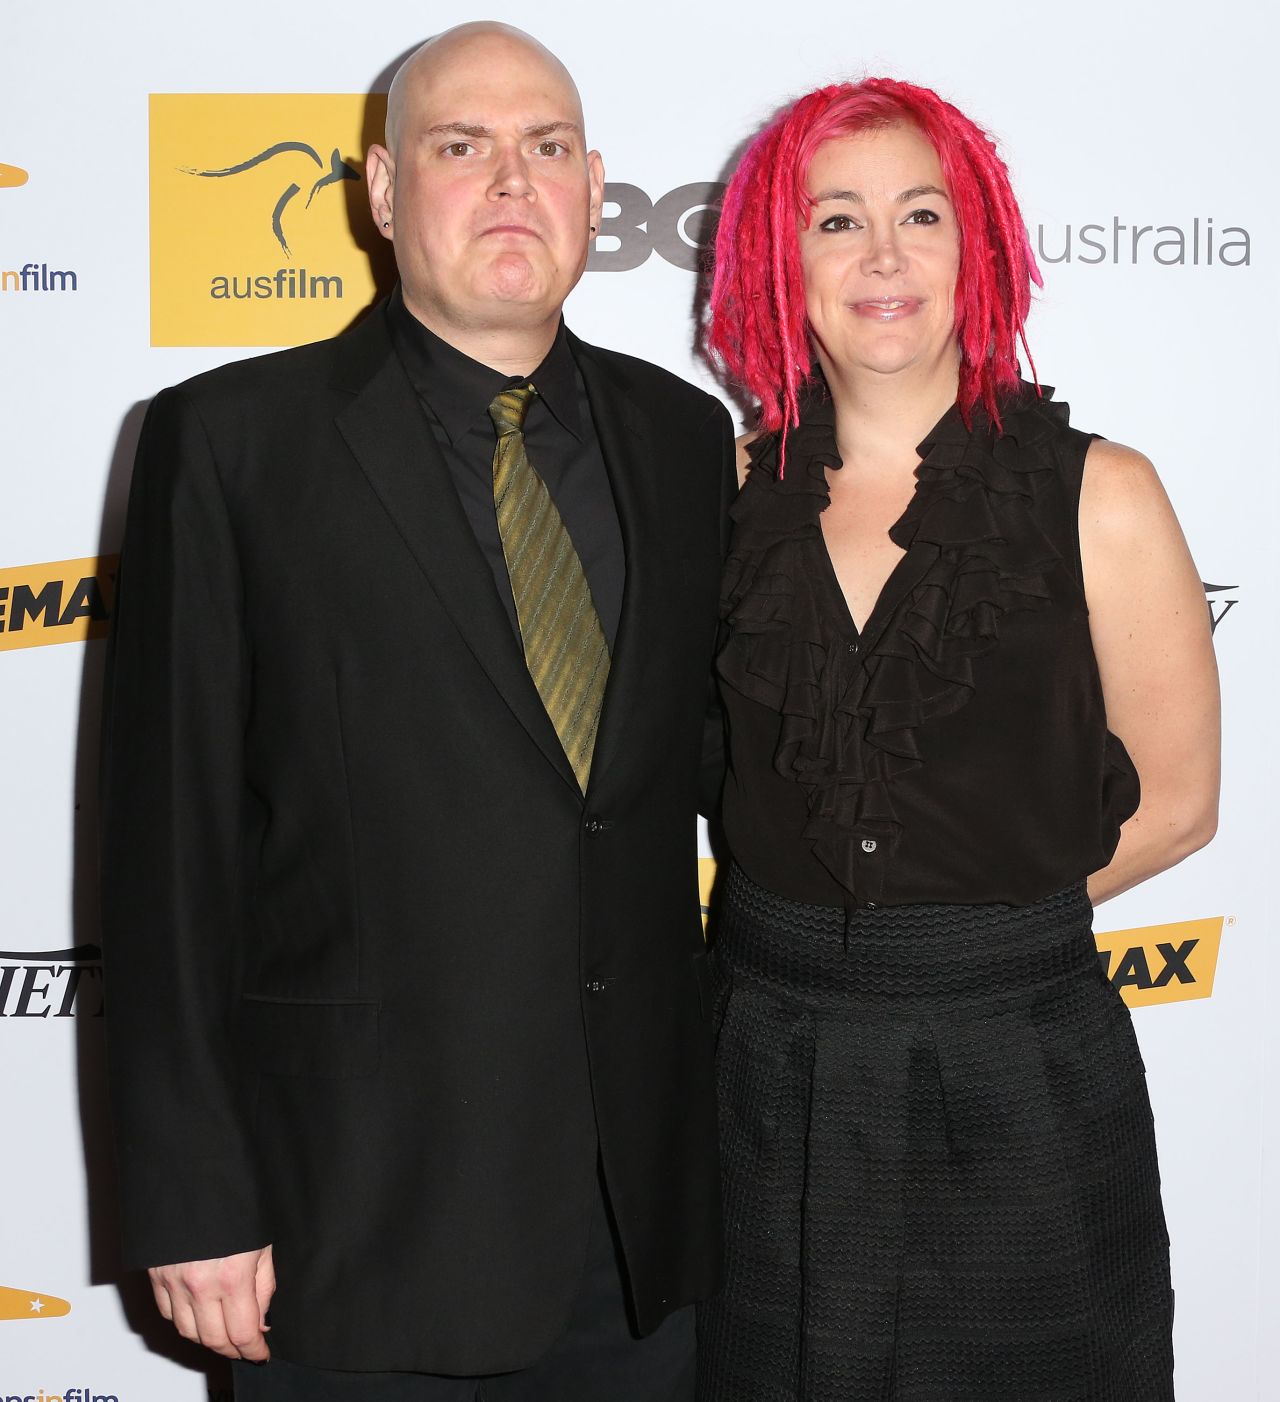 Siblings Andy and Lana Wachowski, who created the "Matrix" movie trilogy, are at work on a Netflix series called "Sense8."